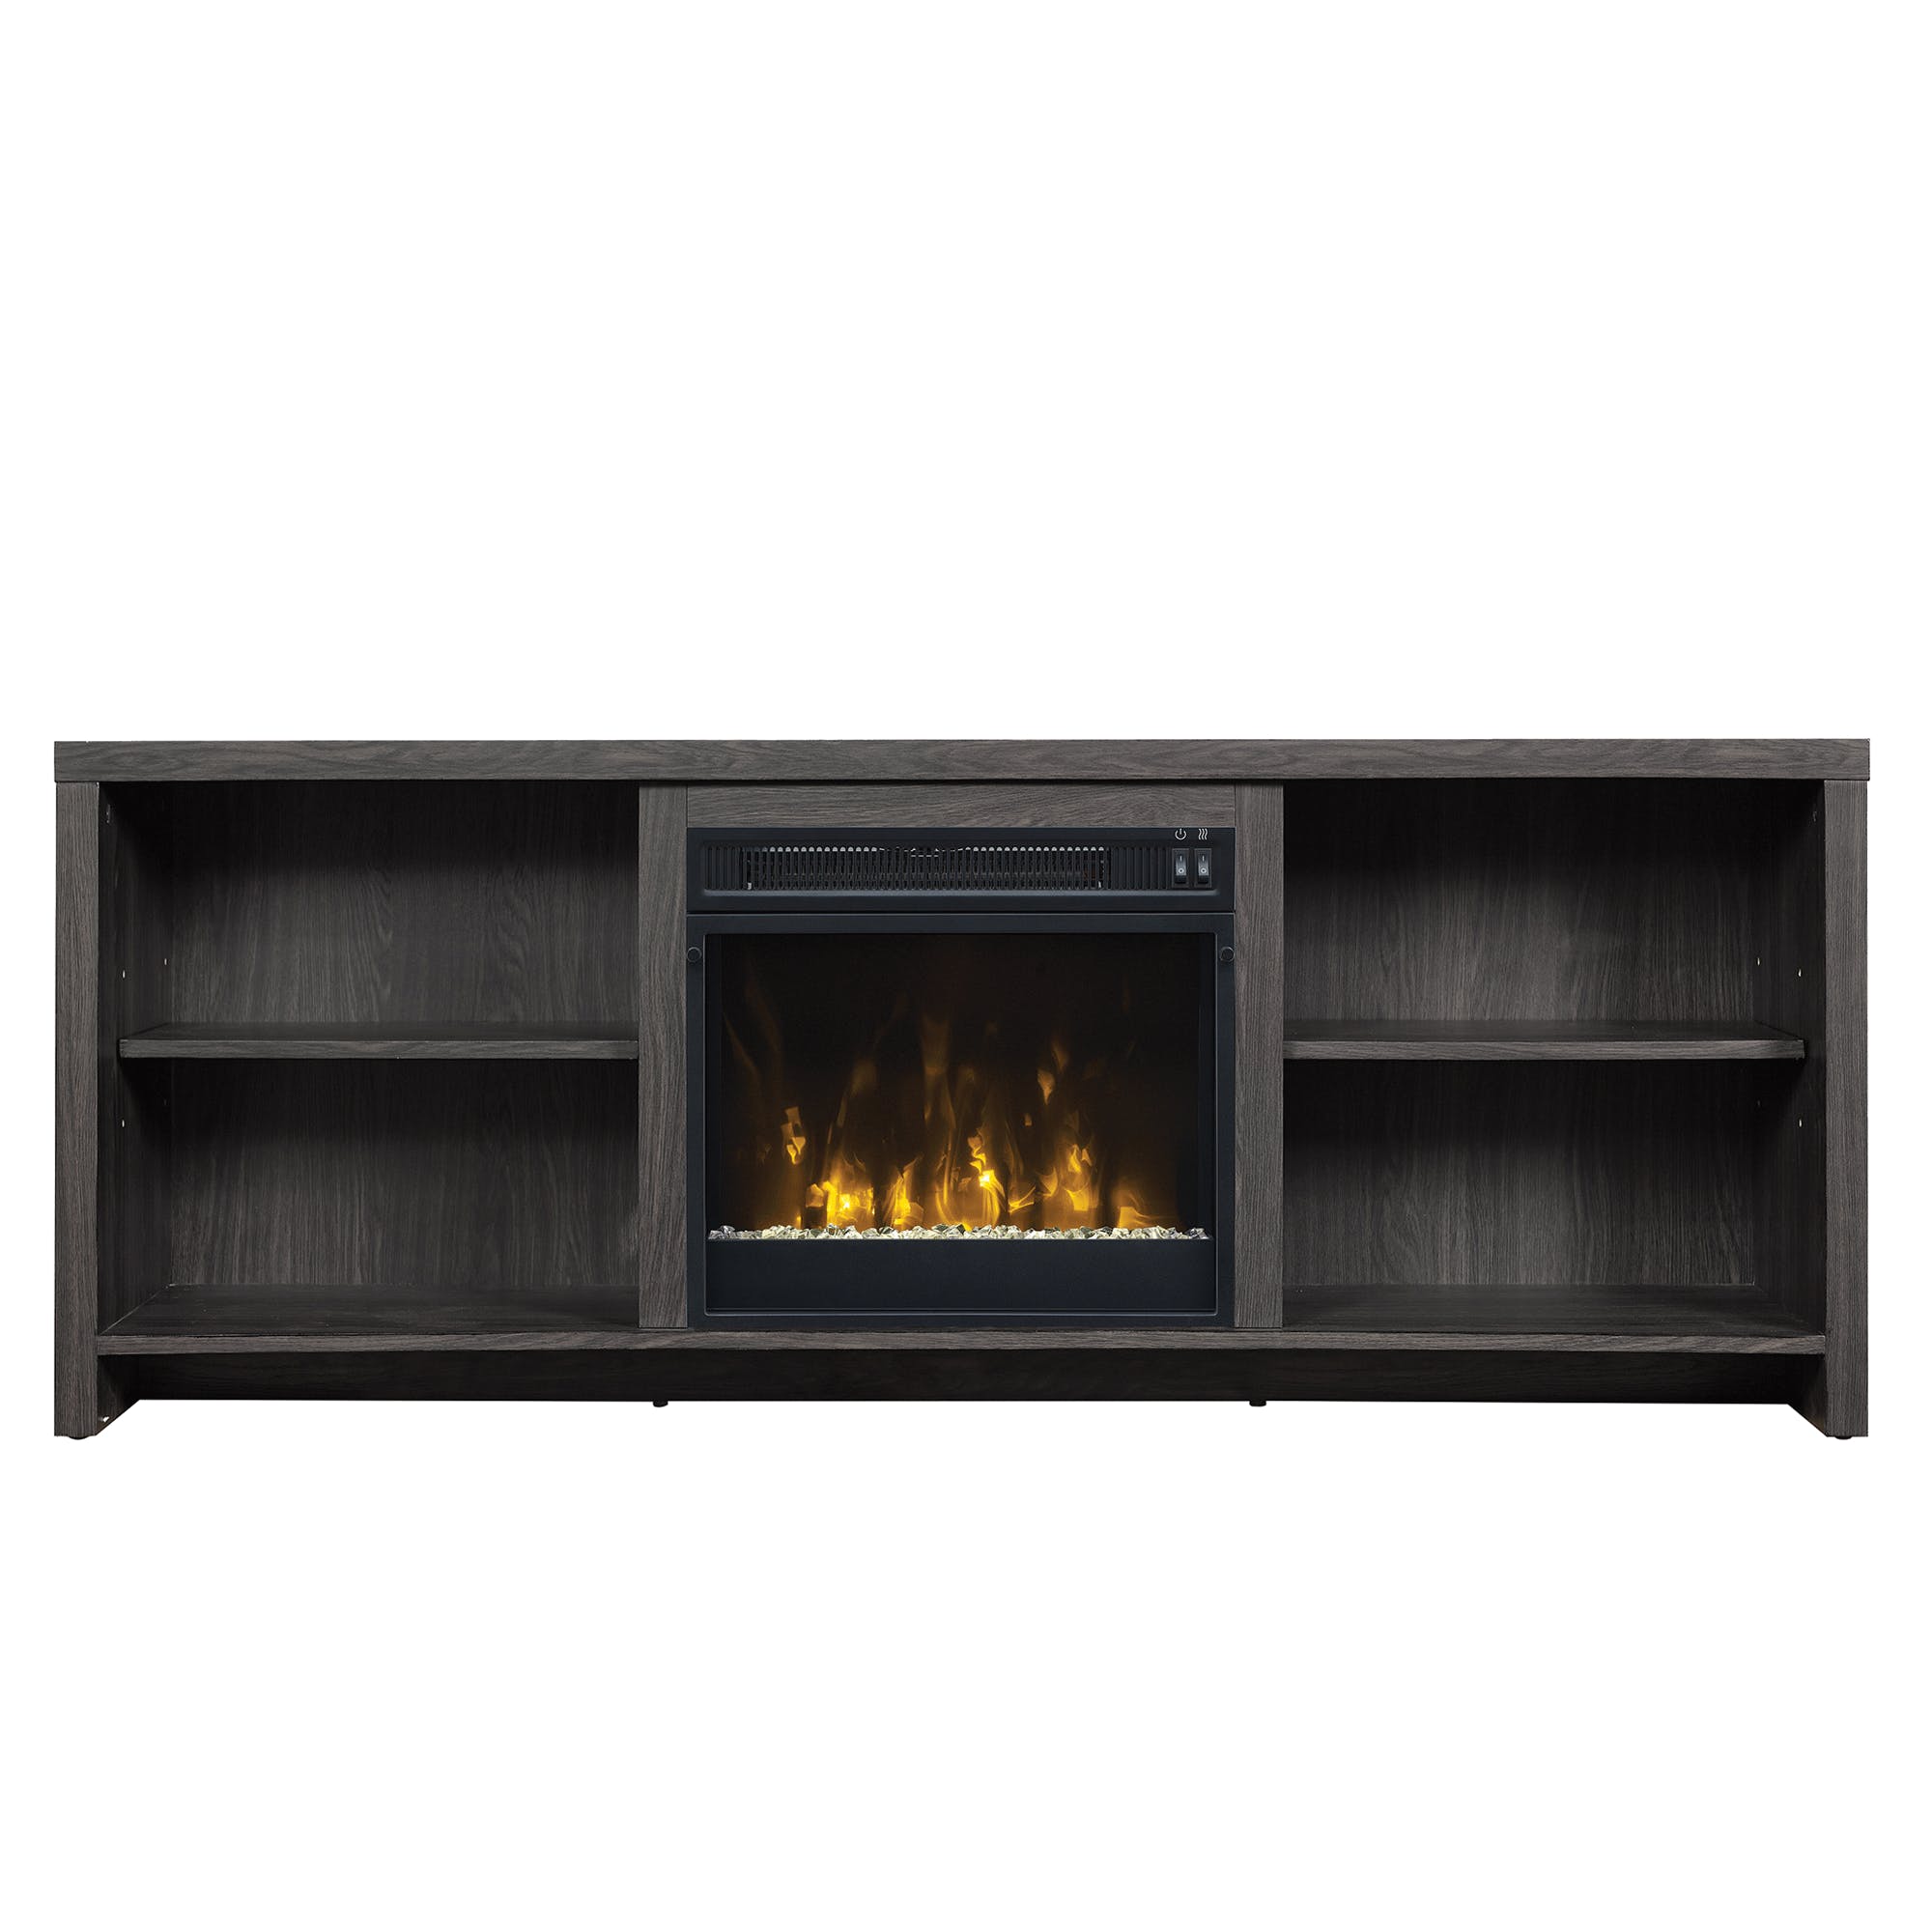 Fake Fireplaces Sale Awesome Shelter Cove Tv Stand for Tvs Up to 65" with 18" Electric